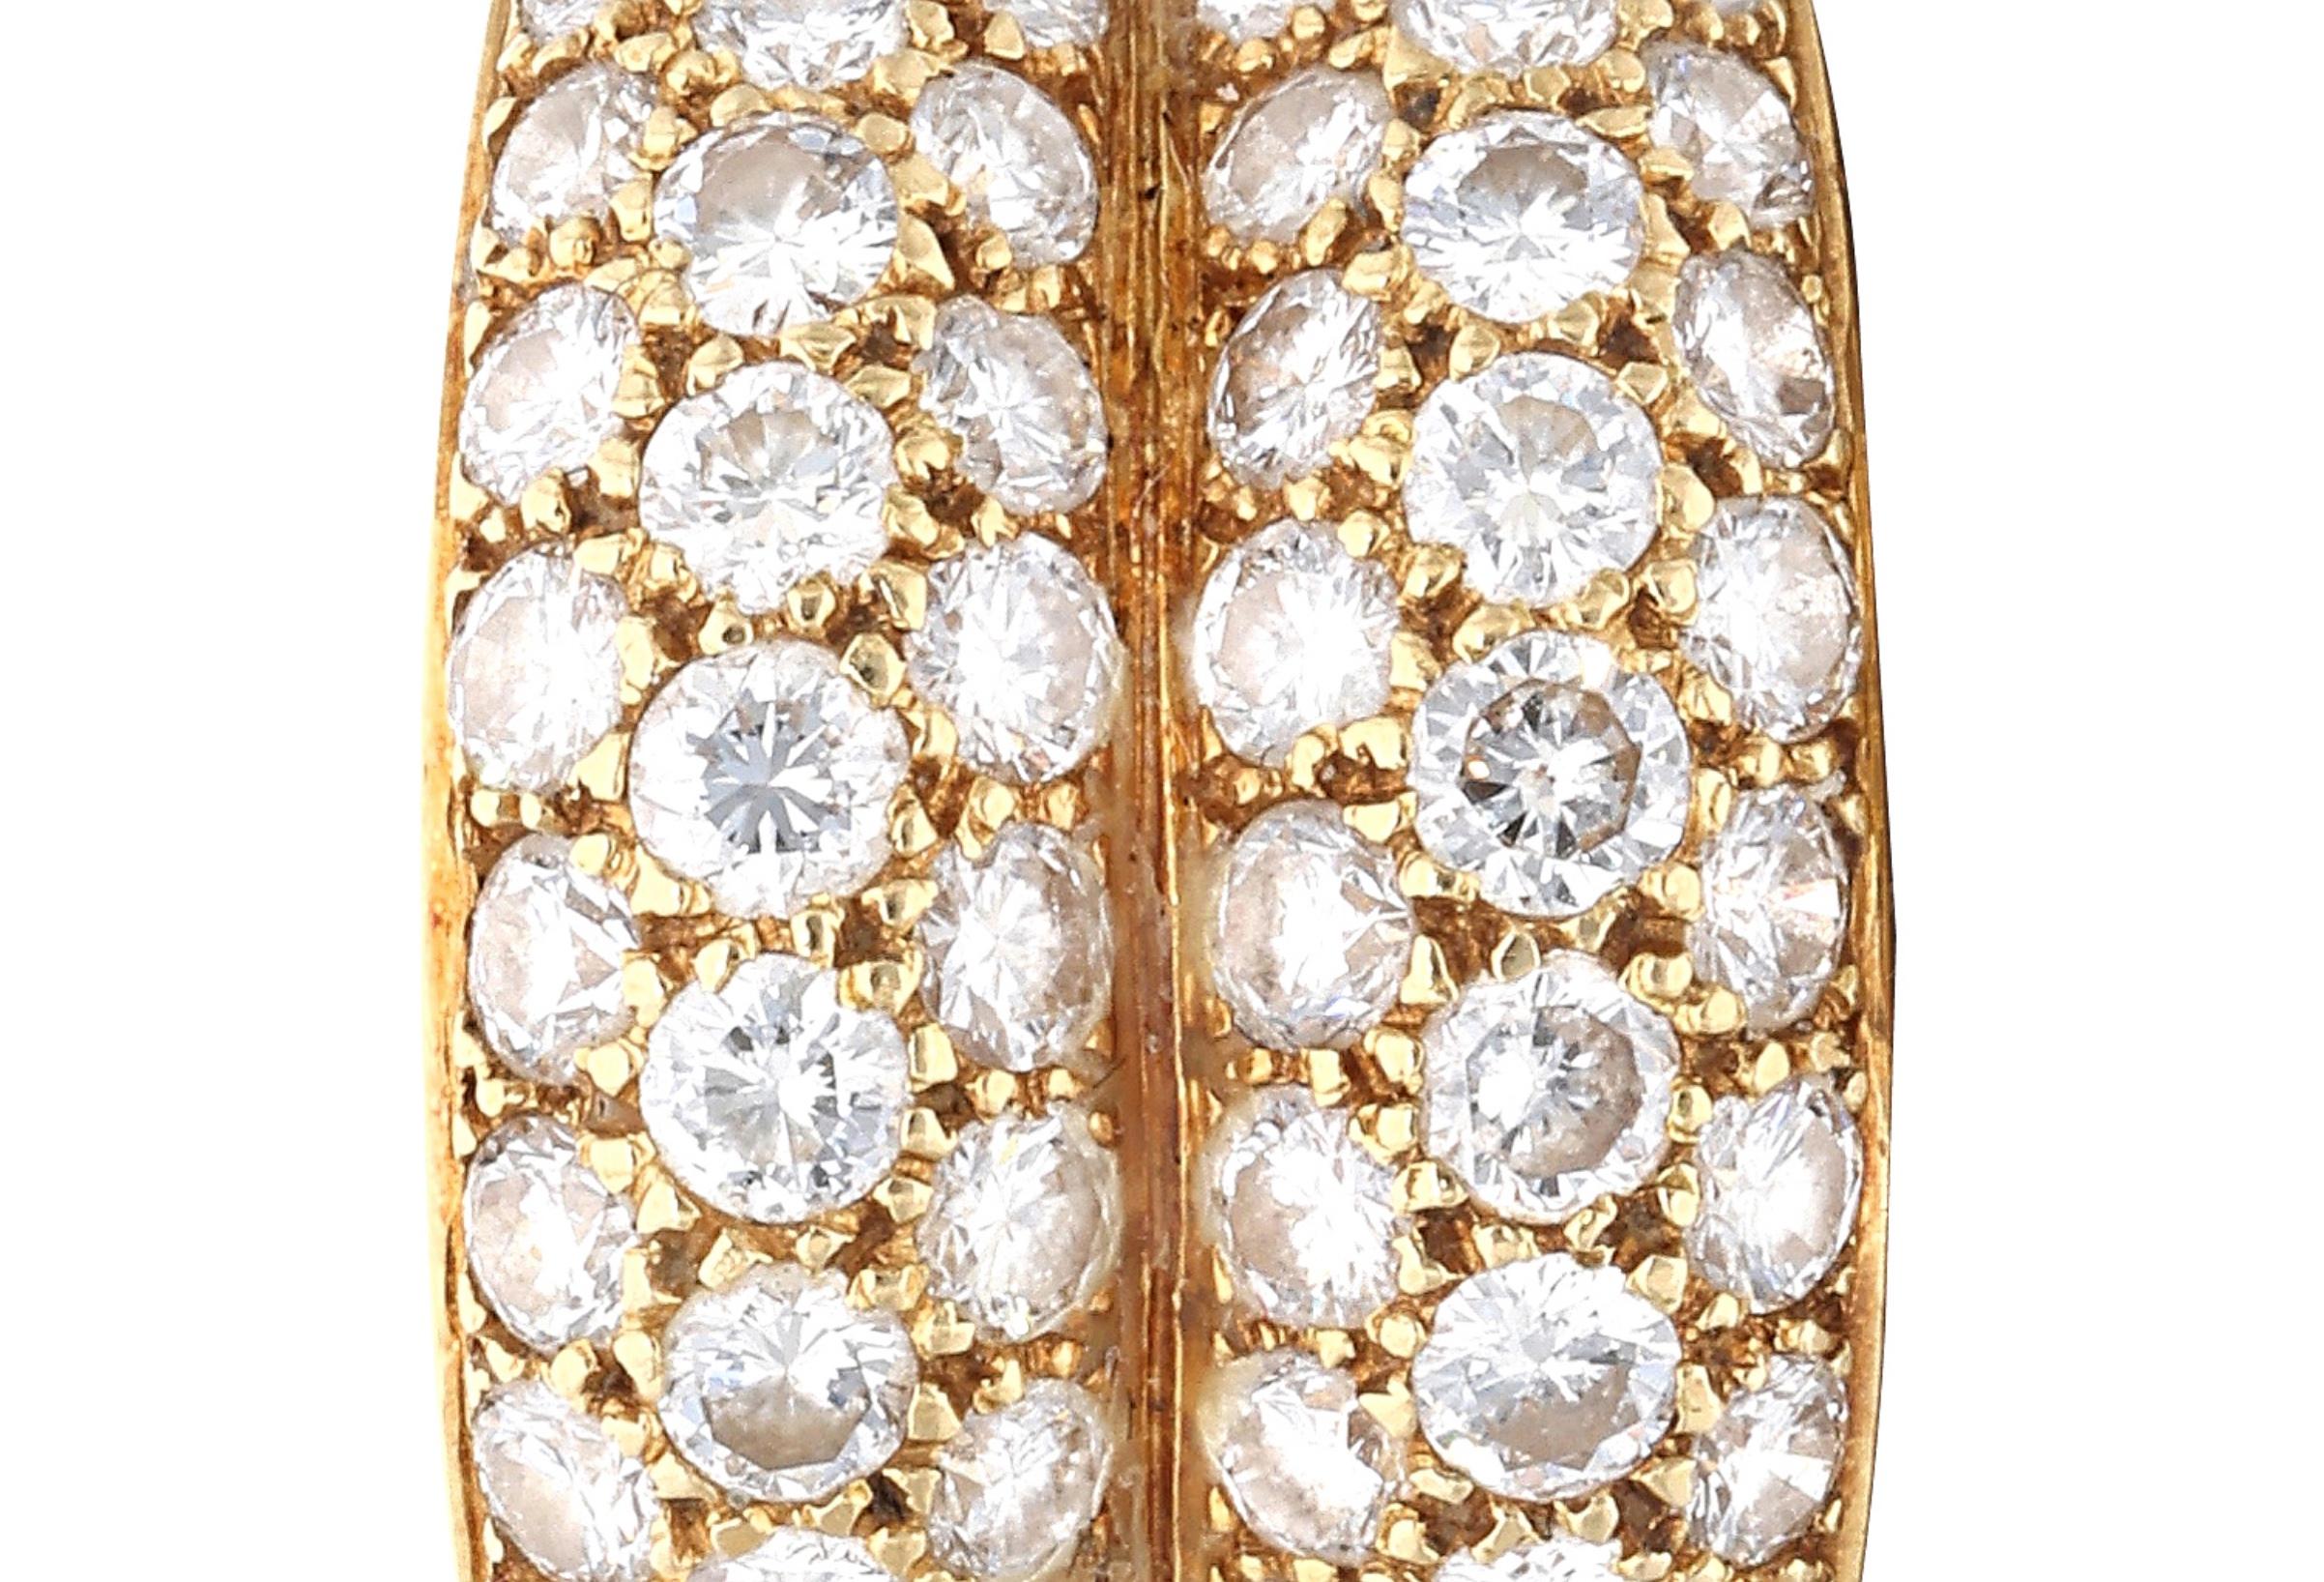 Beautiful land classic Cartier 18k gold ring, featuring two half-band rows of diamonds - approx. 2.40ctw FG/VVS, ring size 5.75, width of the ring 12mm. Comes in Cartier box. Marked: Cartier 750, 1993, C30361, French mark. Weight - 9 grams. 